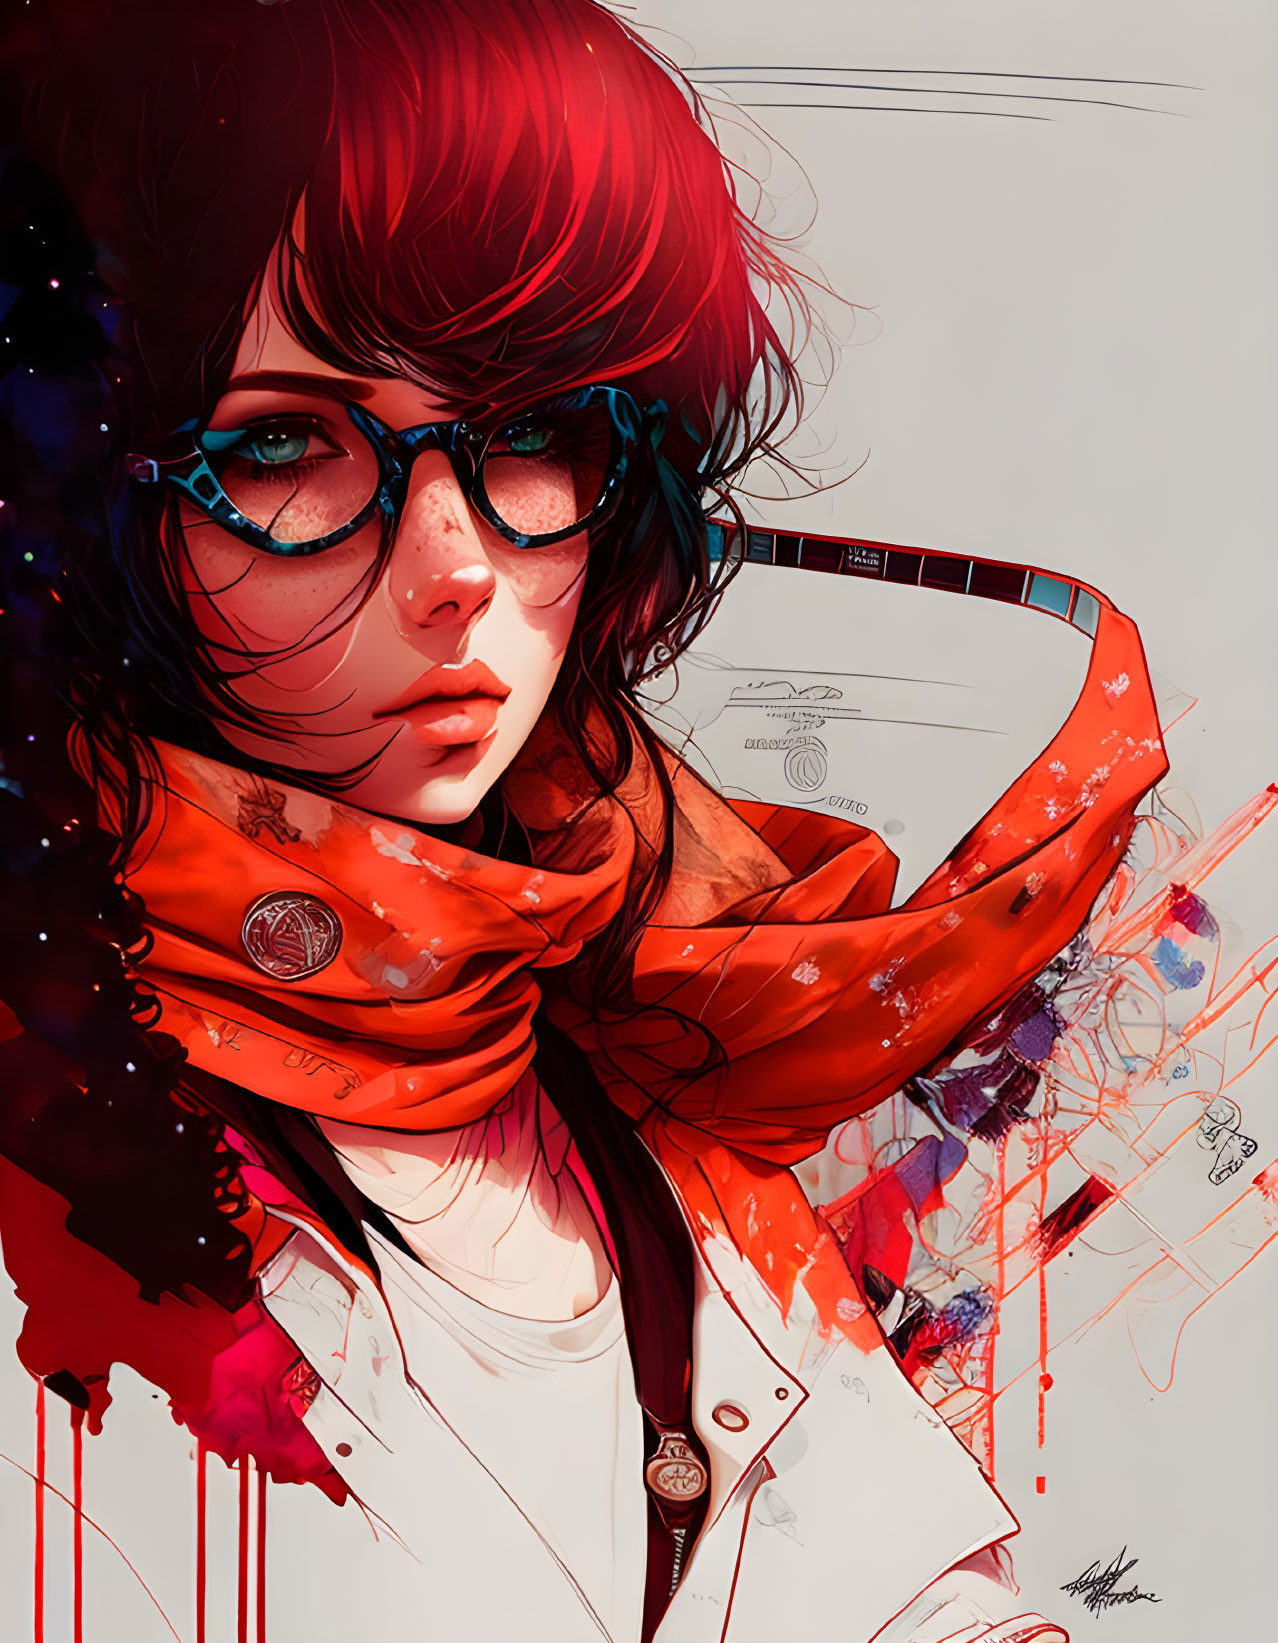 Person with Red Hair and Glasses in Stylized Illustration